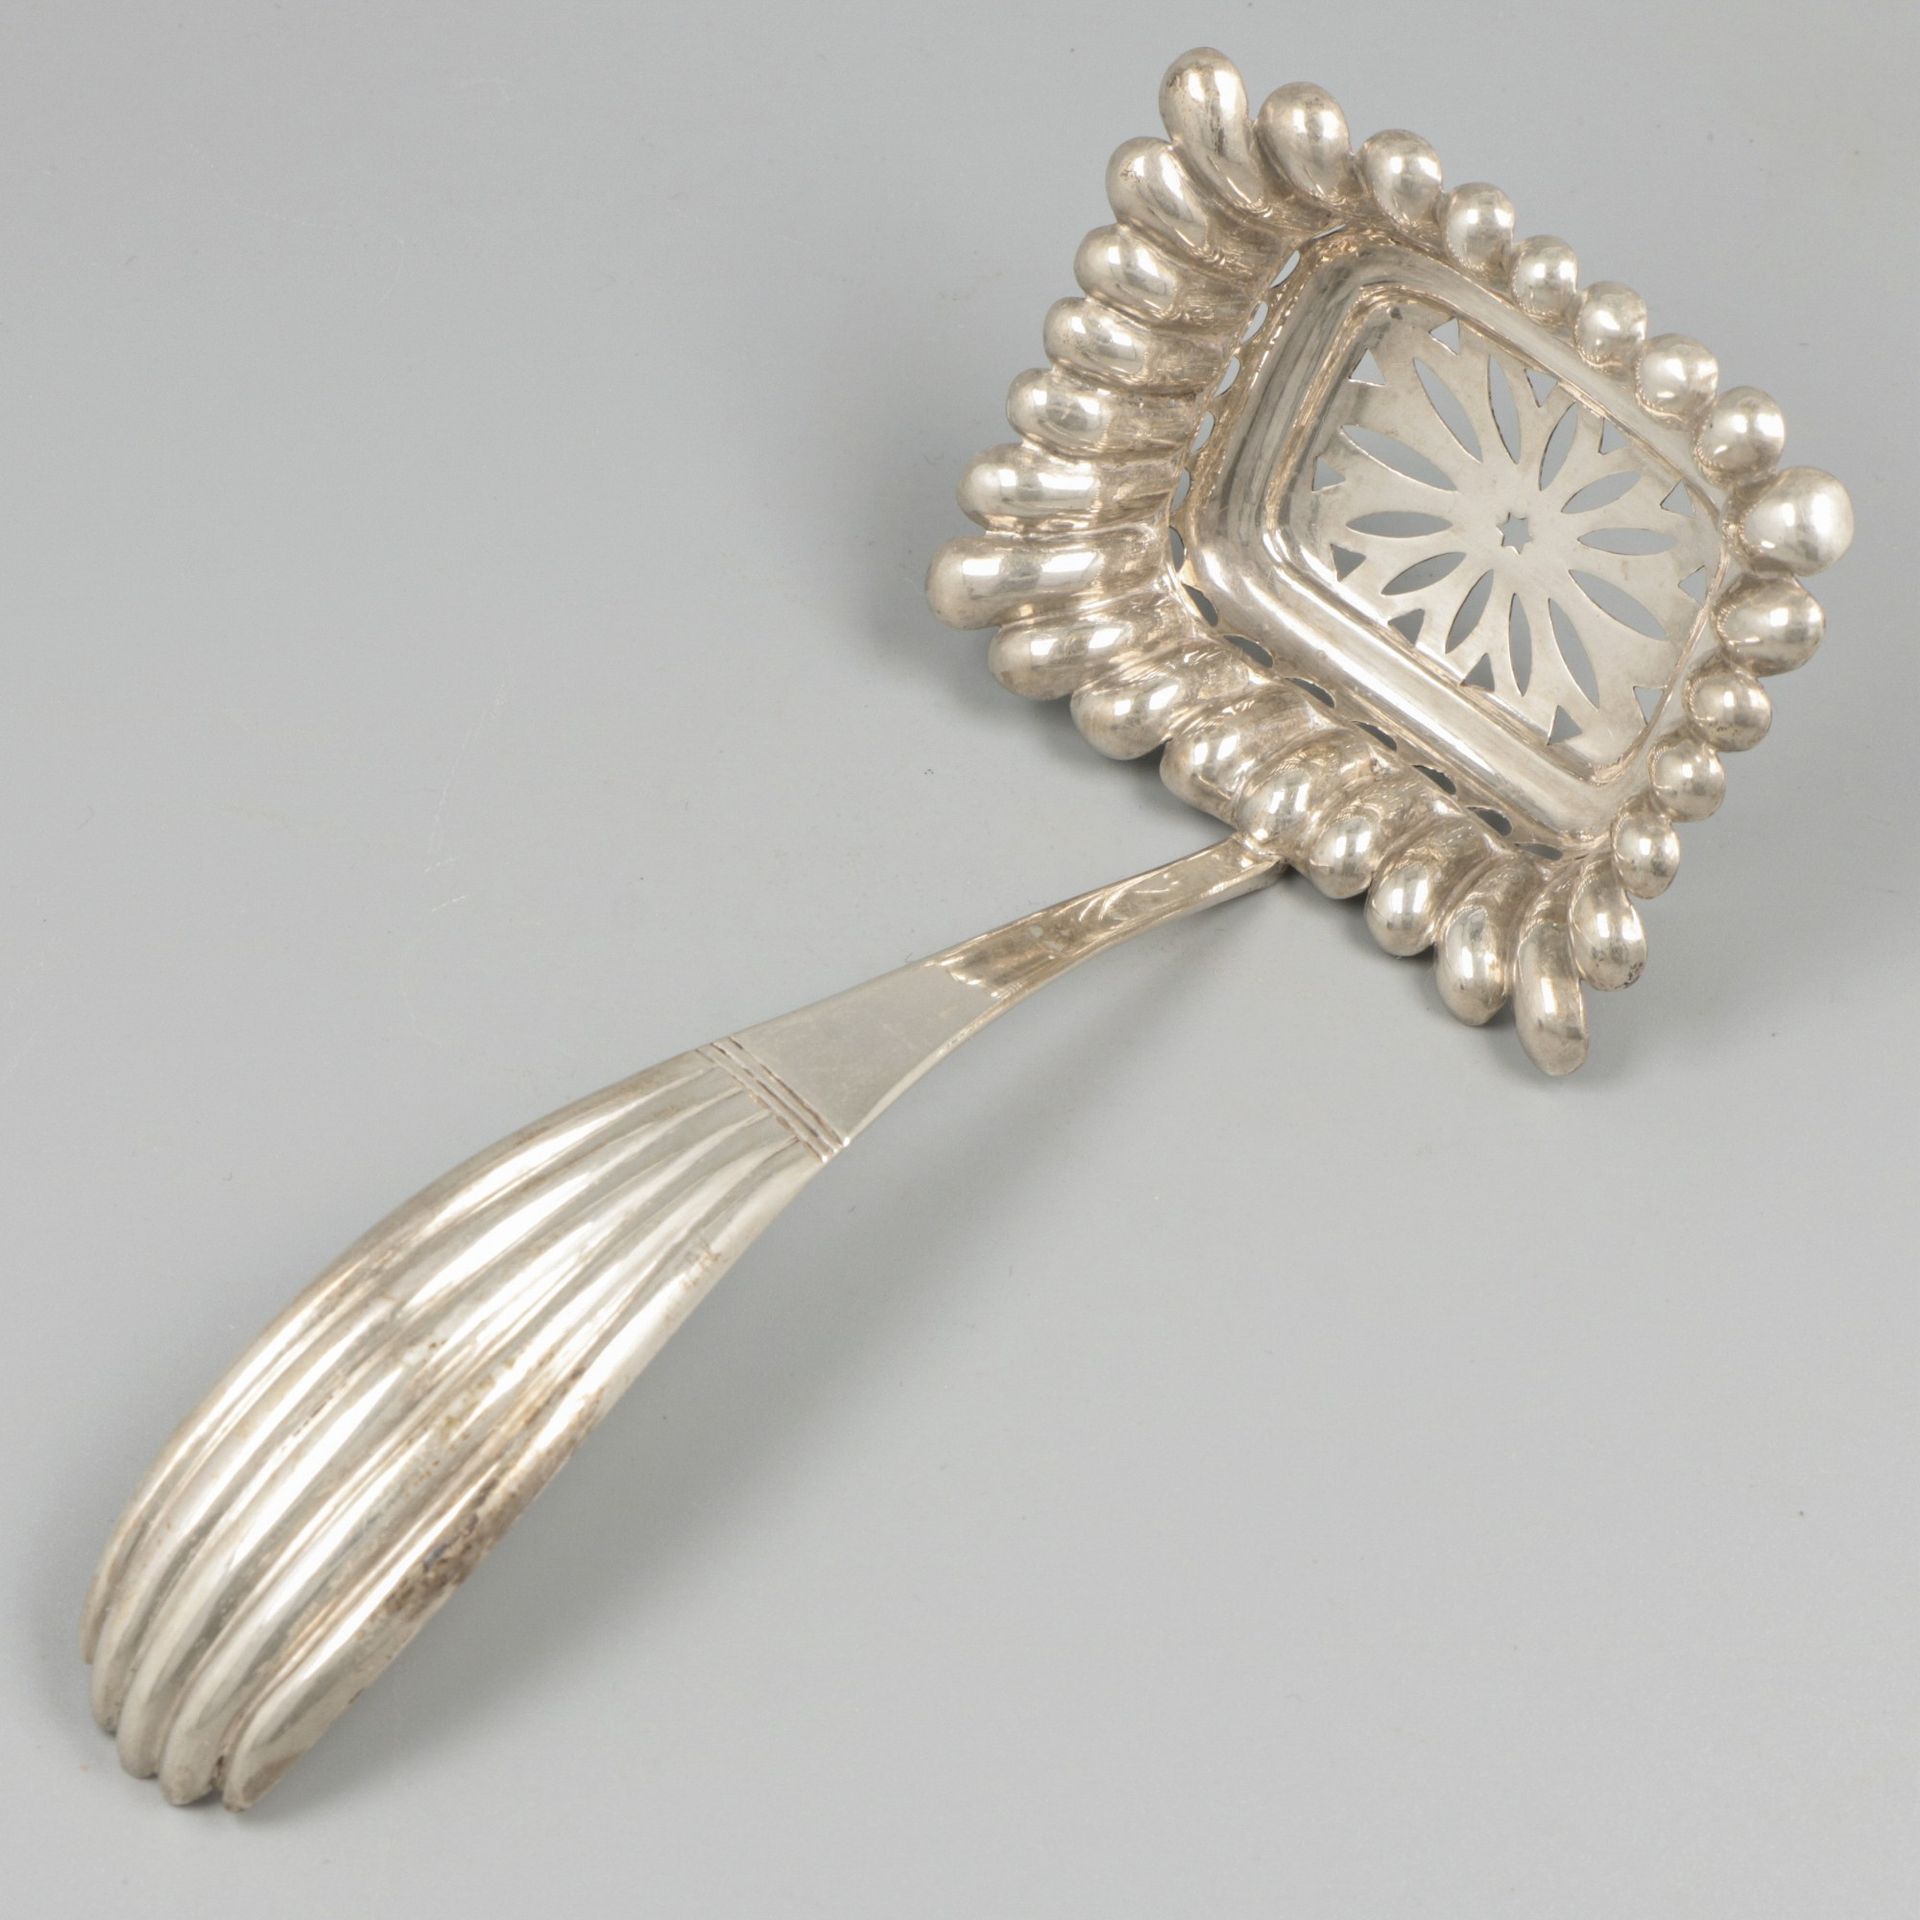 Silver sifter spoon. With convex and lobed shapes and openwork bowl. Netherlands&hellip;